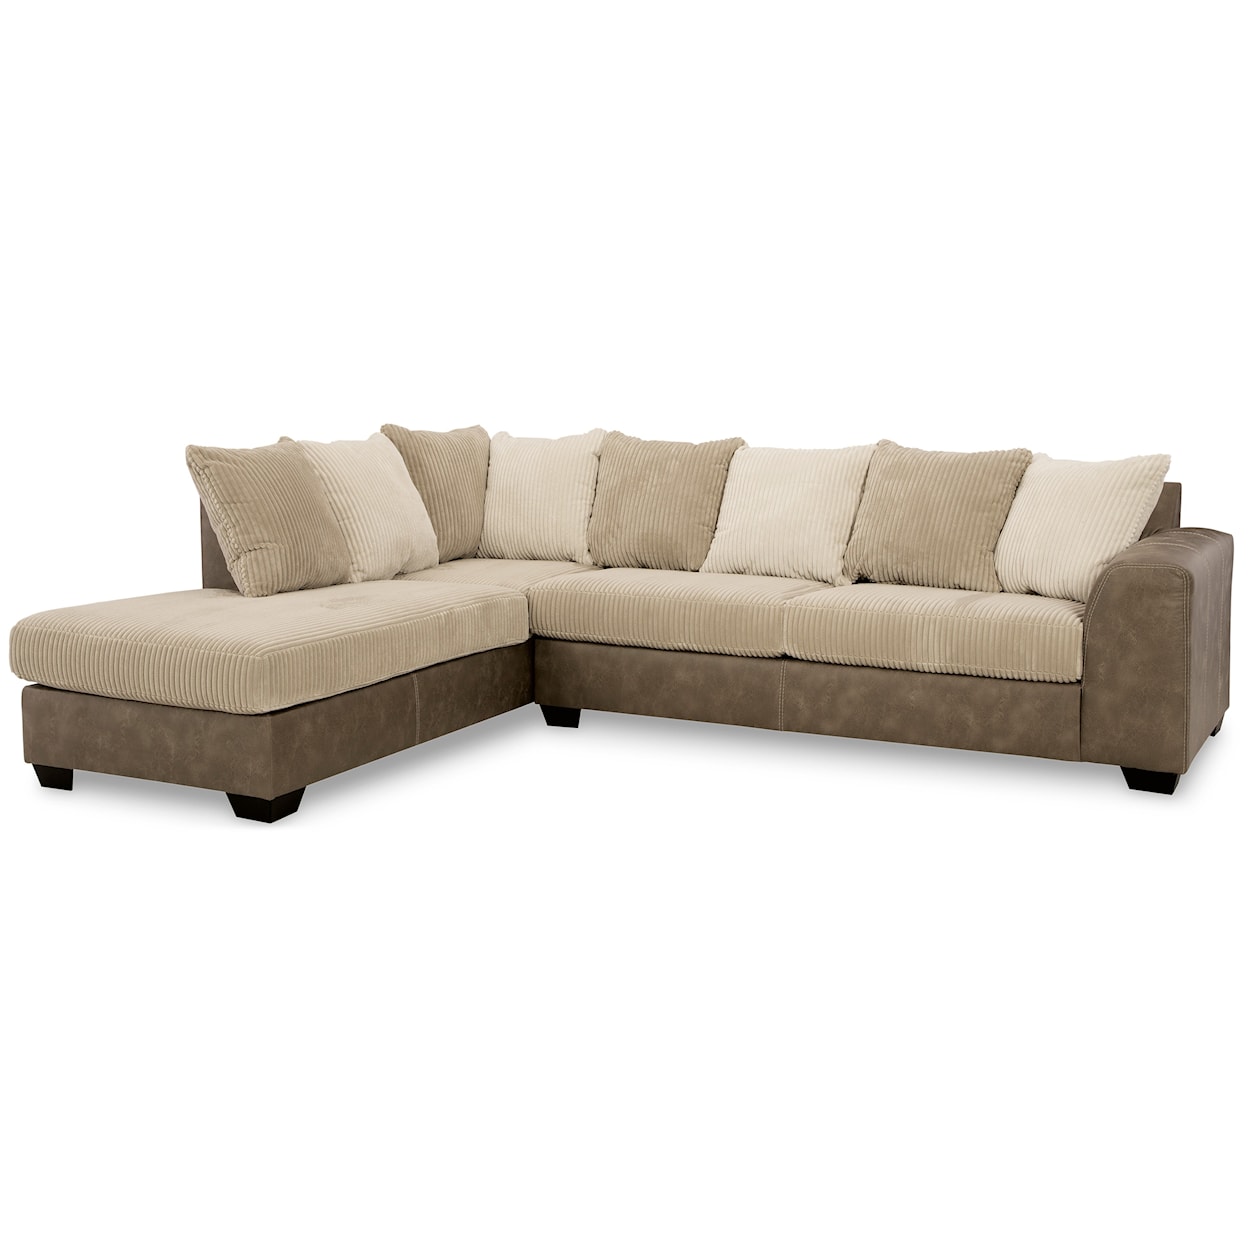 Benchcraft Keskin 2-Piece Sectional with Chaise